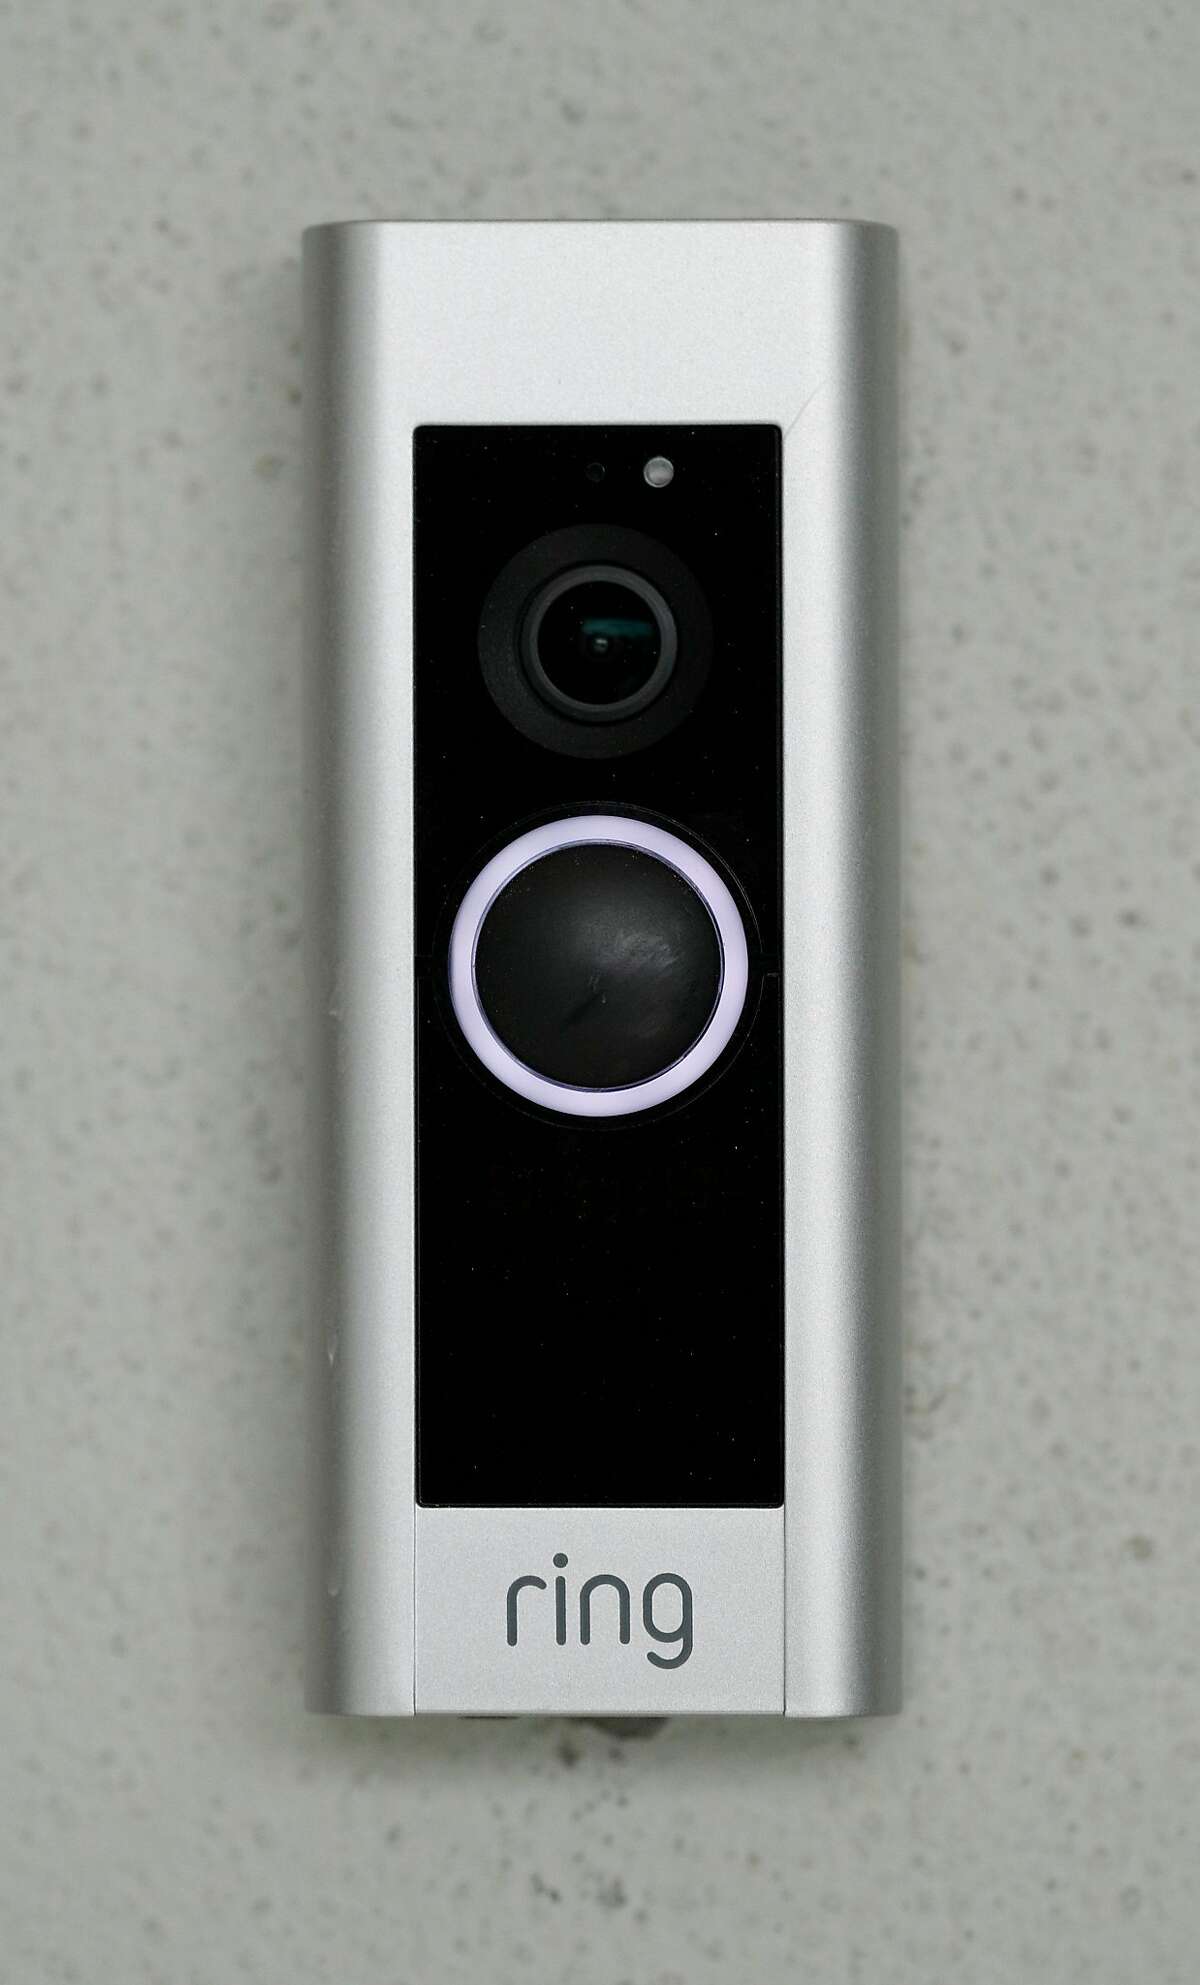 The Ring doorbell is part of the home security system installed by Alice Petty and Jason Hogg in their home in San Francisco, Calif., on Tuesday, December 19, 2017. The couple installed the system in their Glen Park home, and recently capturing video of a porch pirate opening a package and stealing a keyboard they ordered online. The couple installed a Ring video doorbell, two other cameras, and a series of iPads inside so they can monitor the security video, which is stored on a local network storage drive.